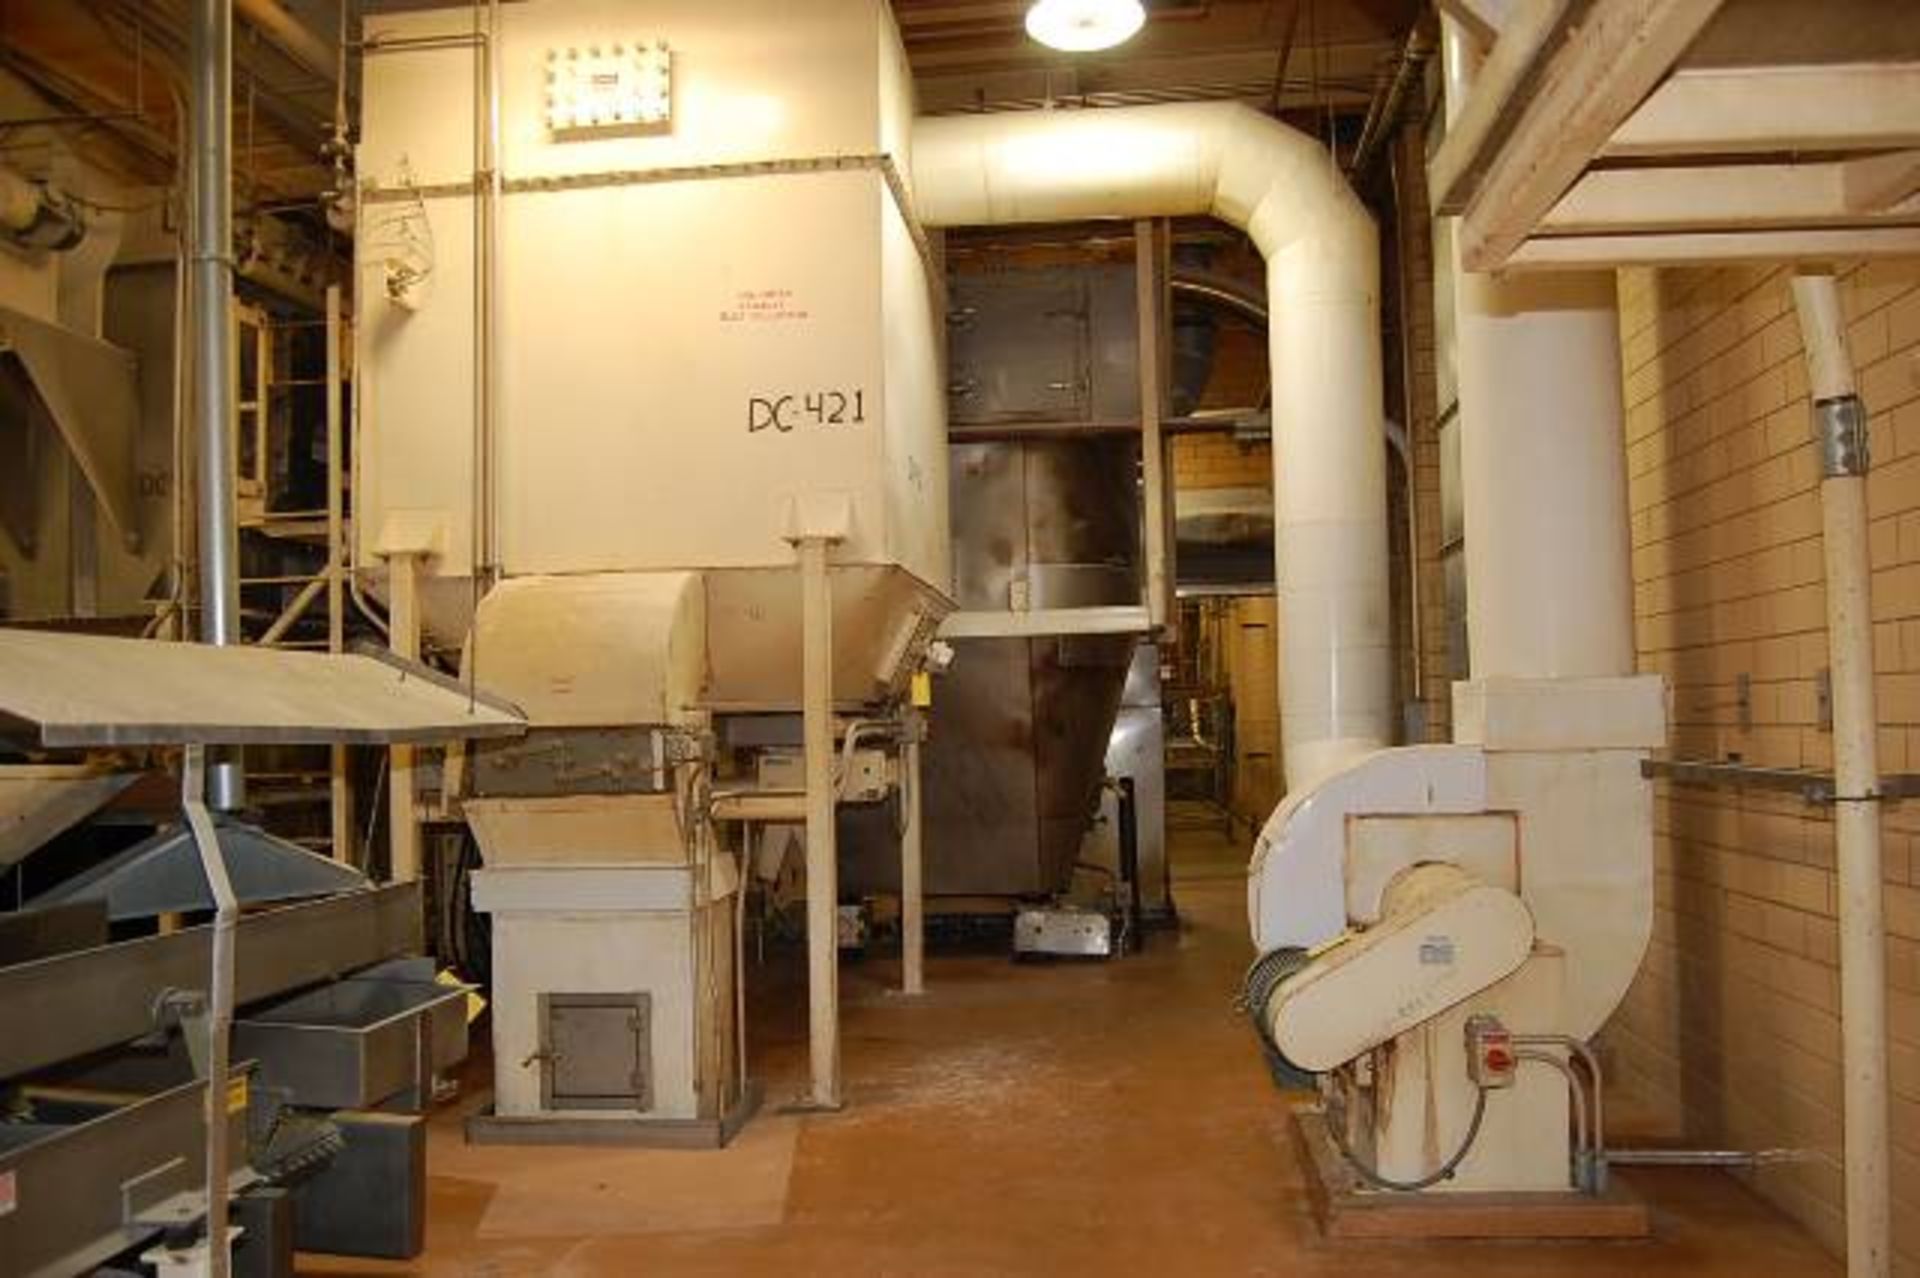 Dust Collector w/Rotary Valve, Blower, 15 HP Motor, 230/460 Volt, ID DC-421